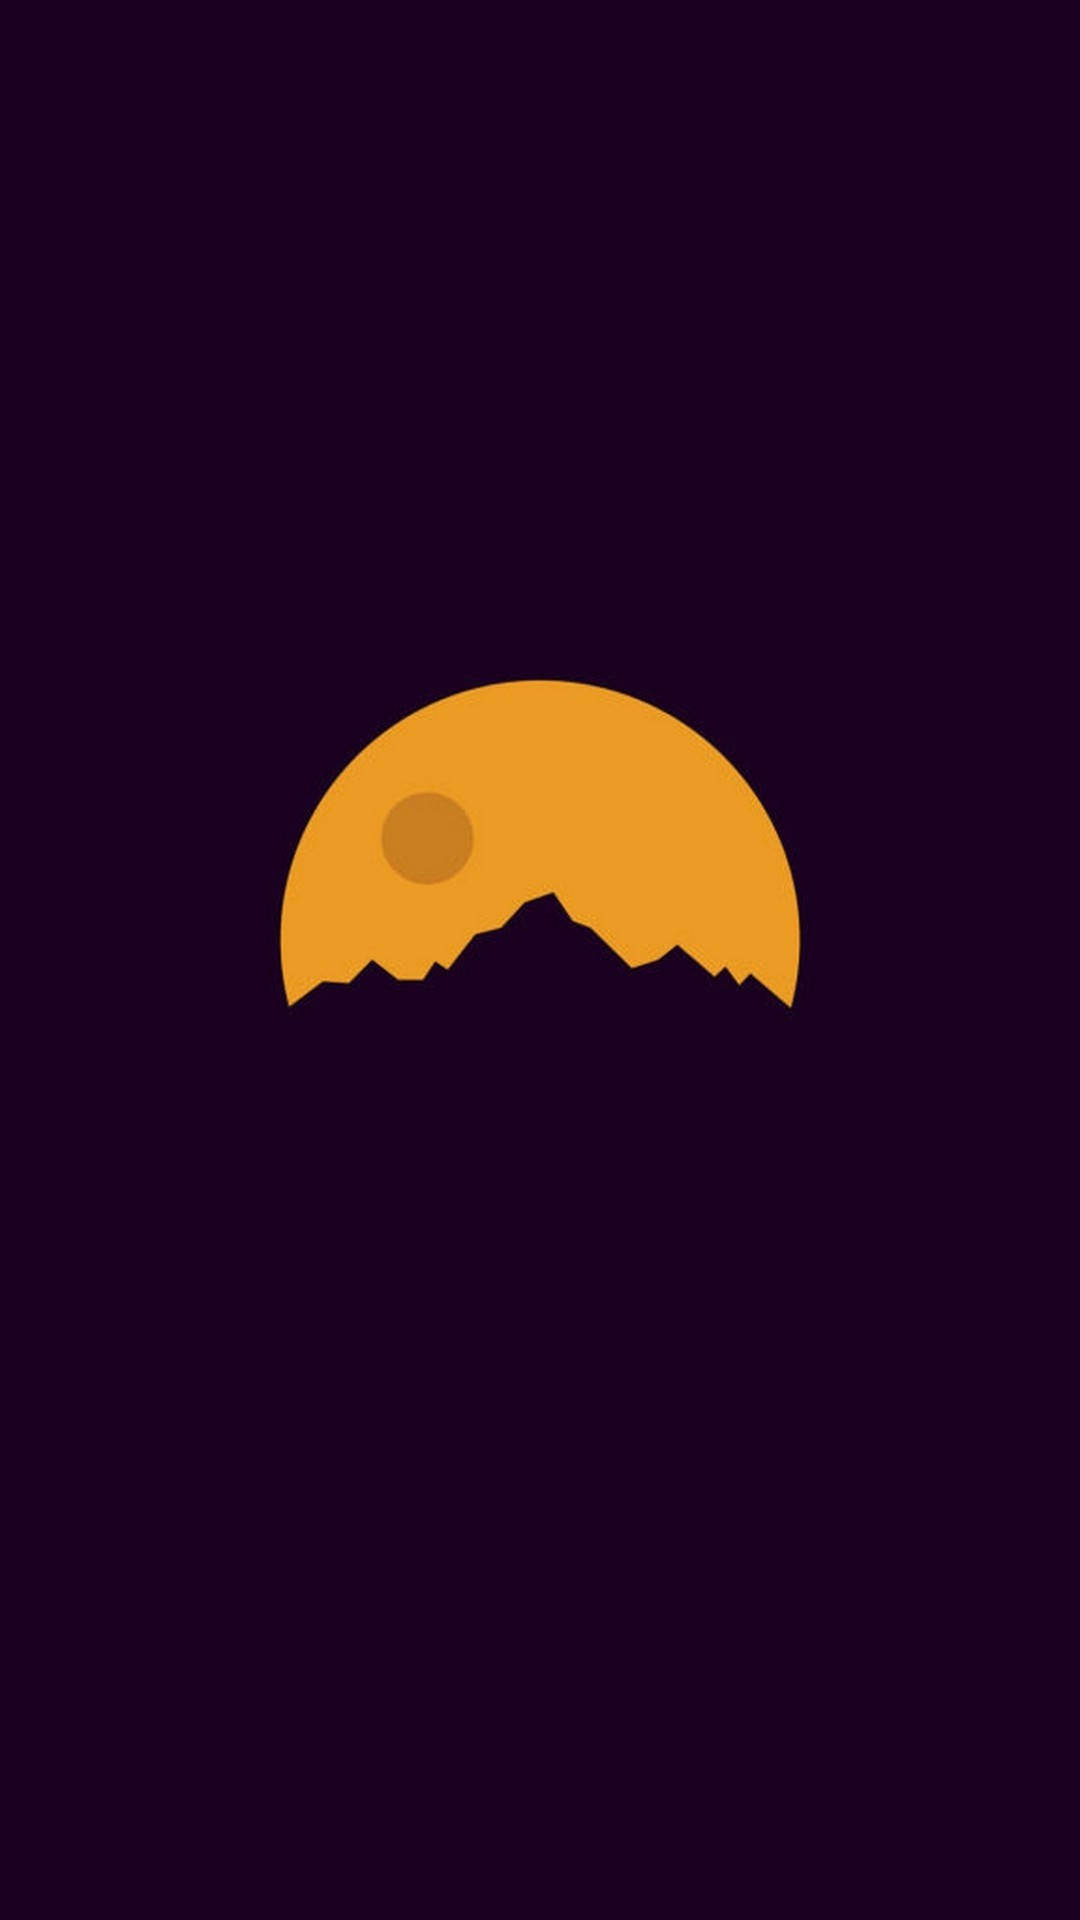 Simple Hd Mountain And Moon